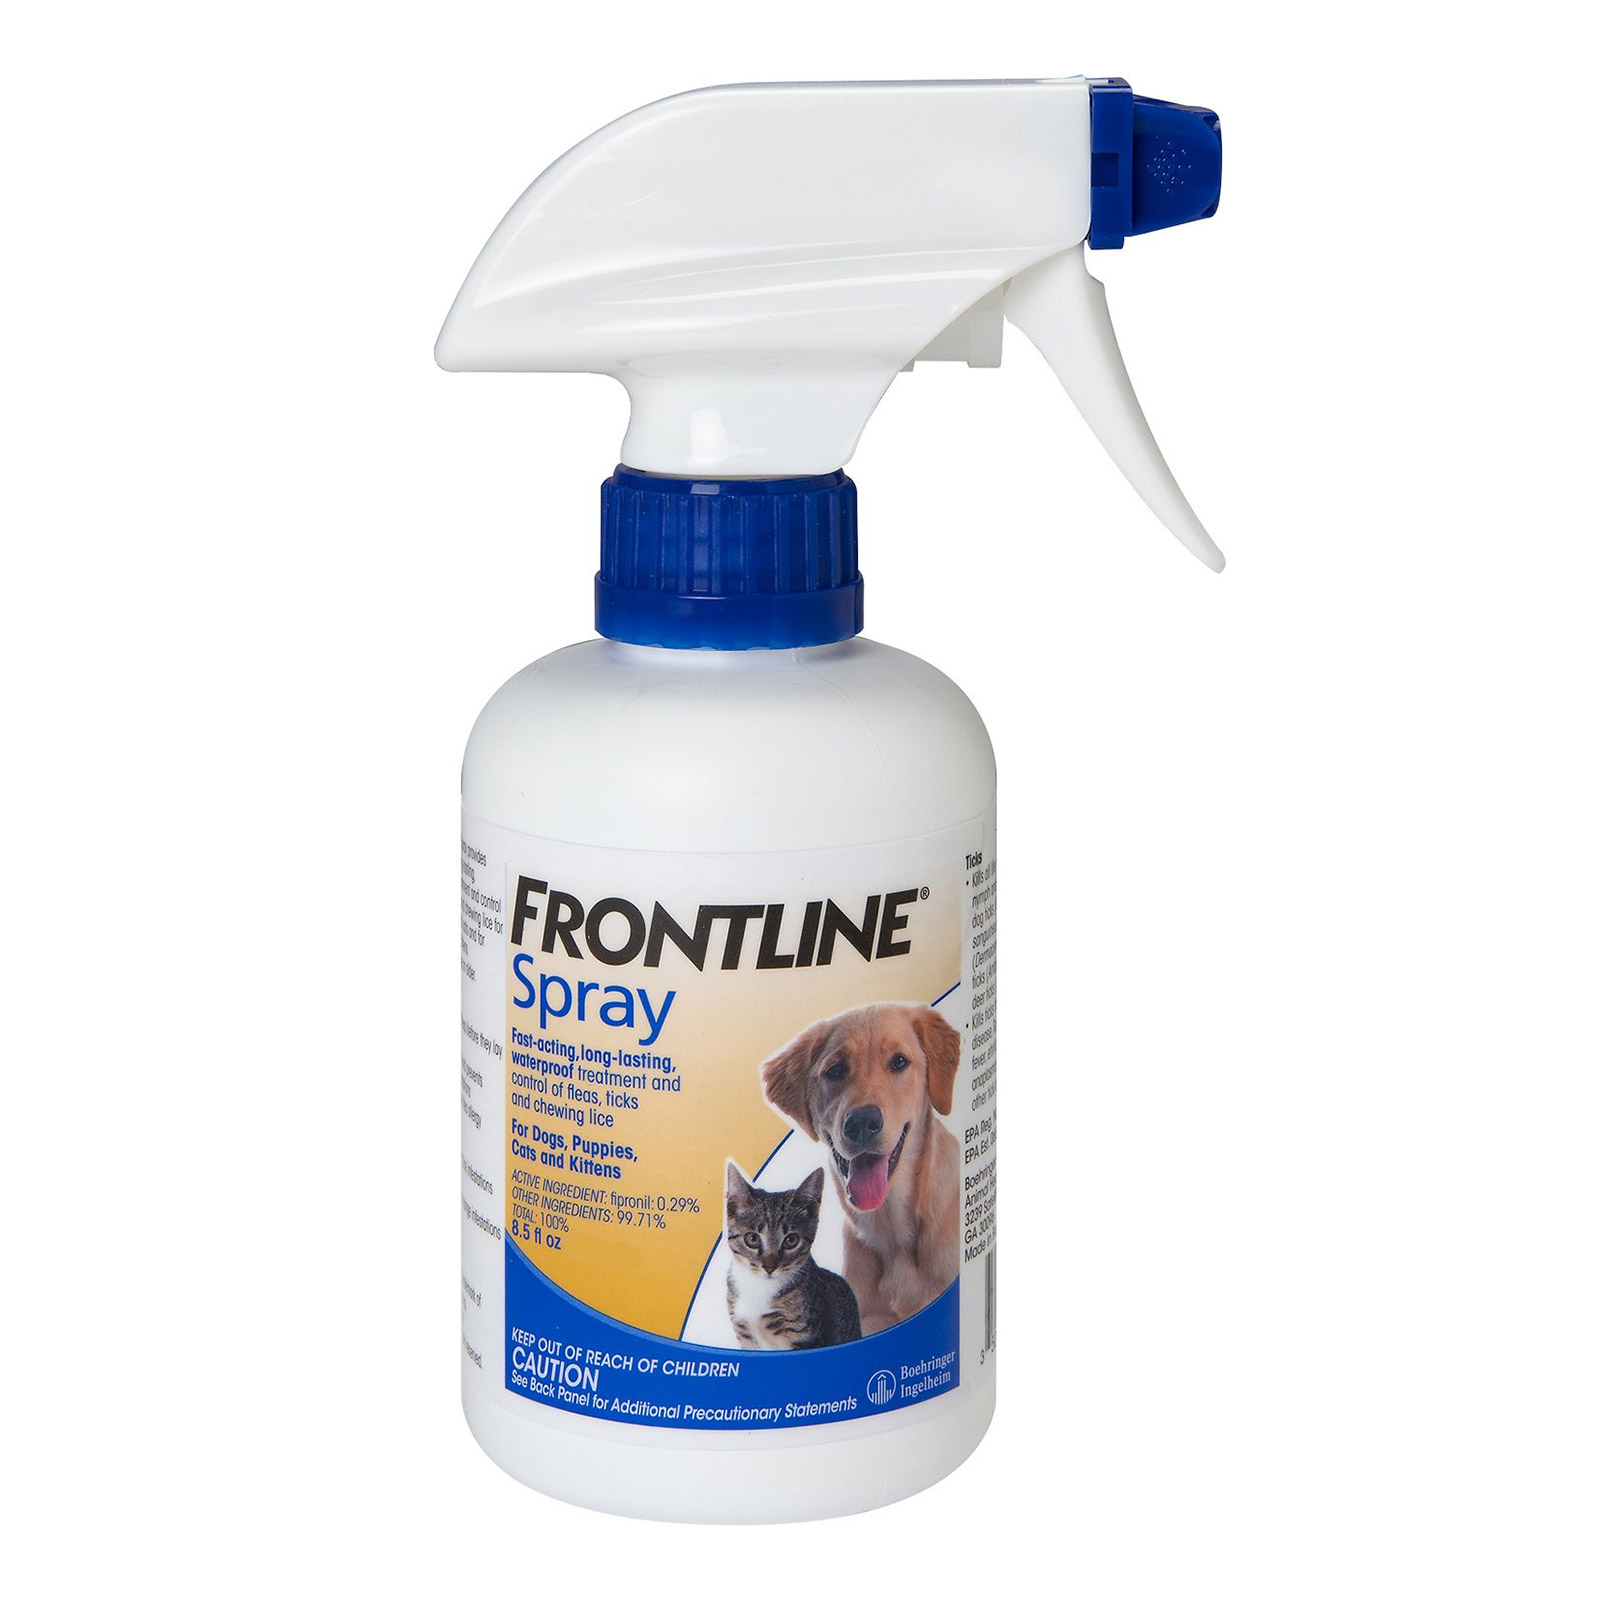 Frontline Spray For Dogs/Cats 250 Ml
